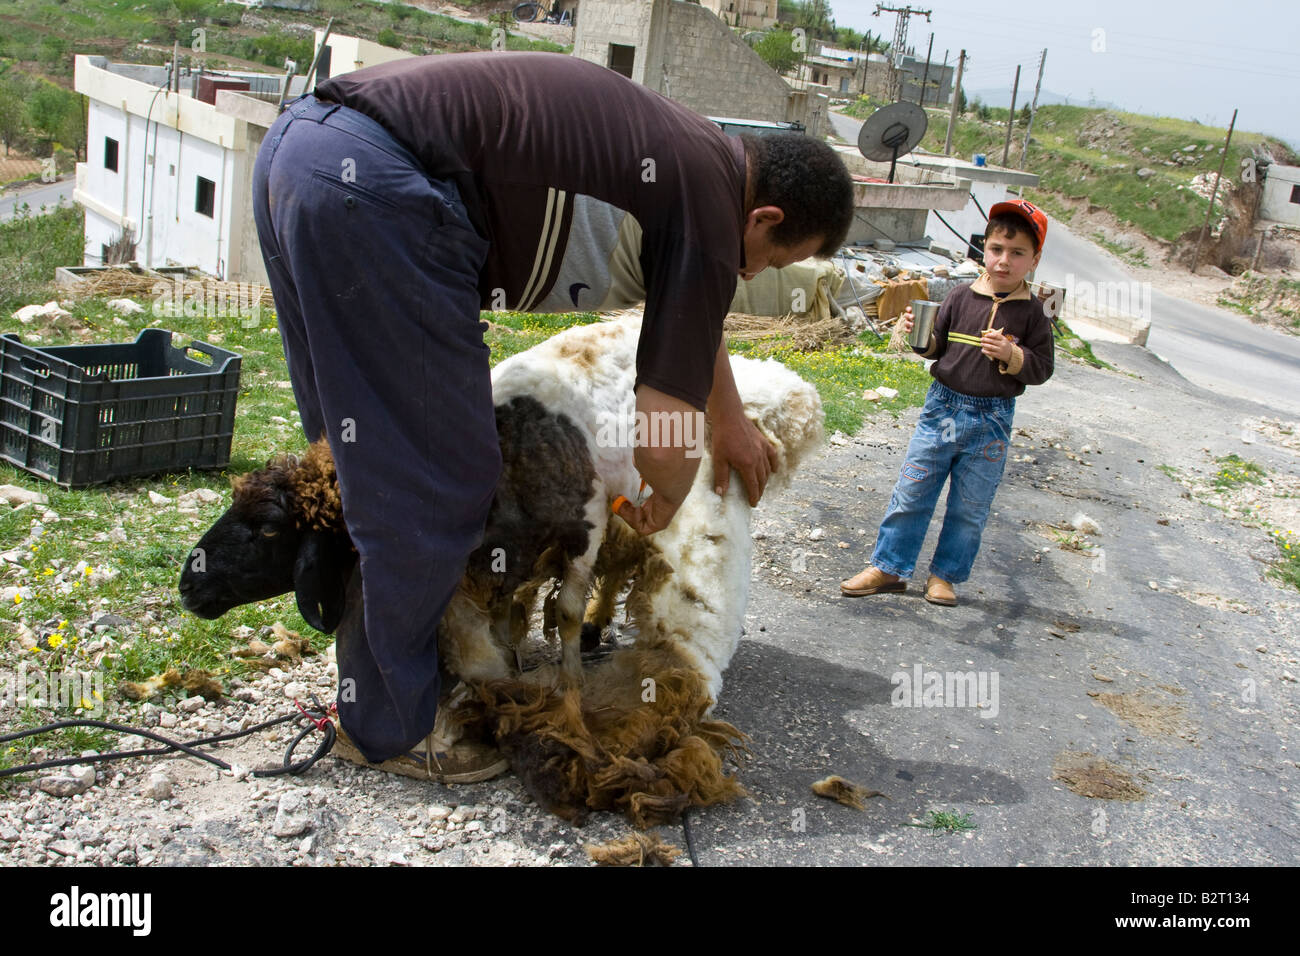 Shearing a Sheep in the Syrian Countryside Stock Photo